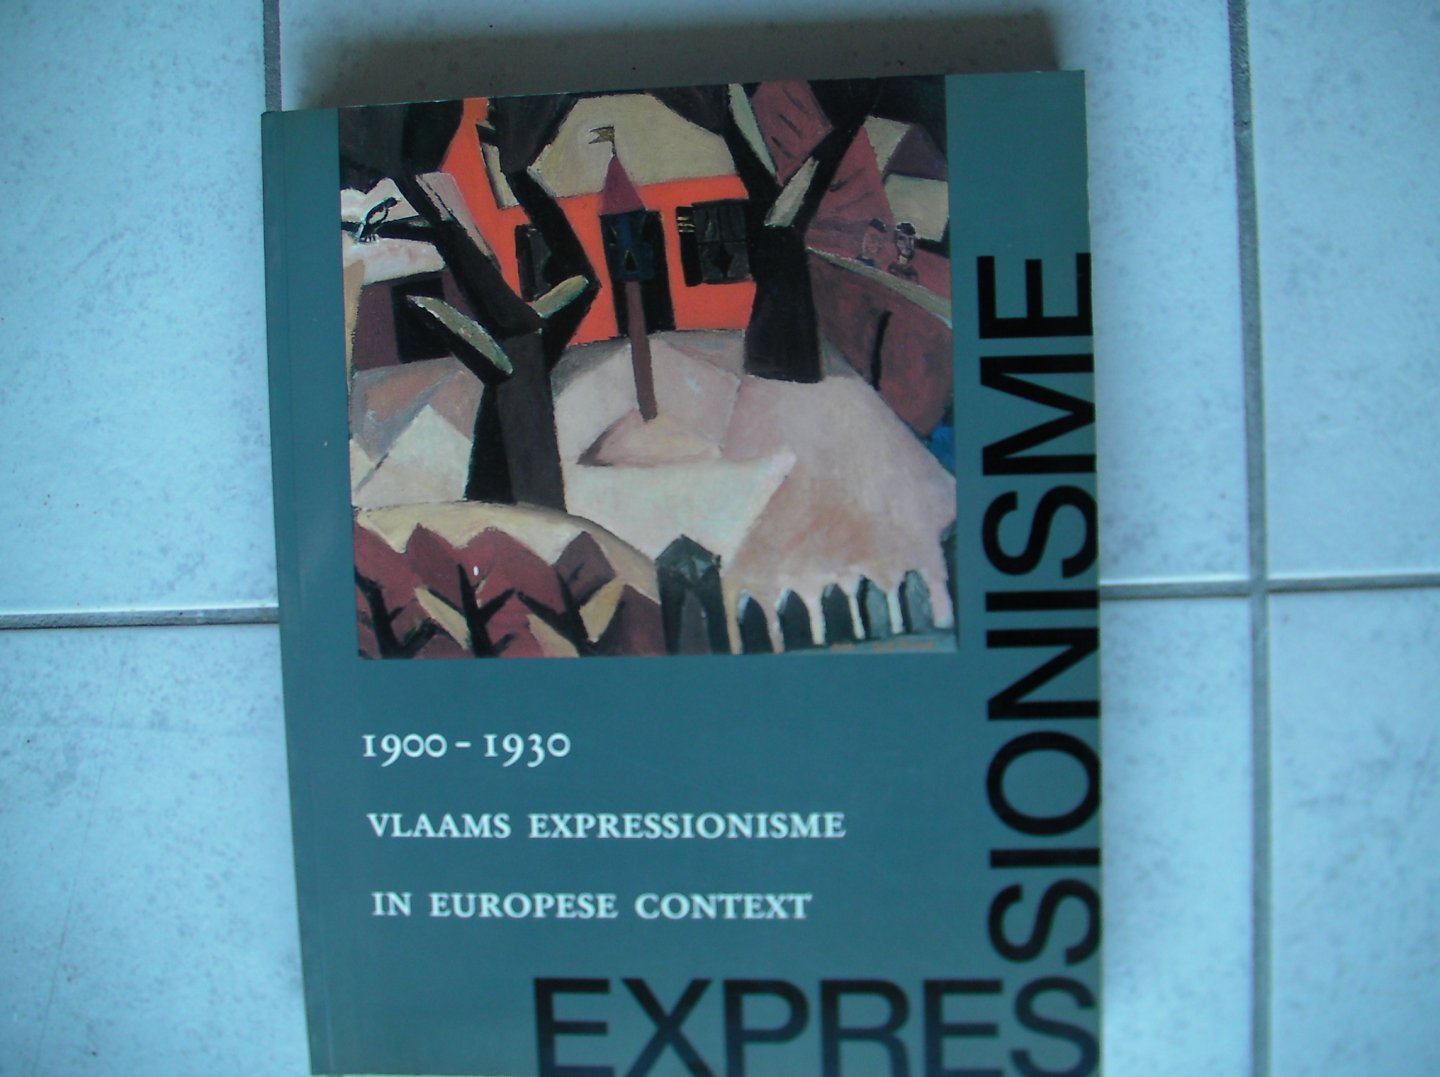 Robert Hozee - Vlaams Expressionisme In Europese Context 1900-1930